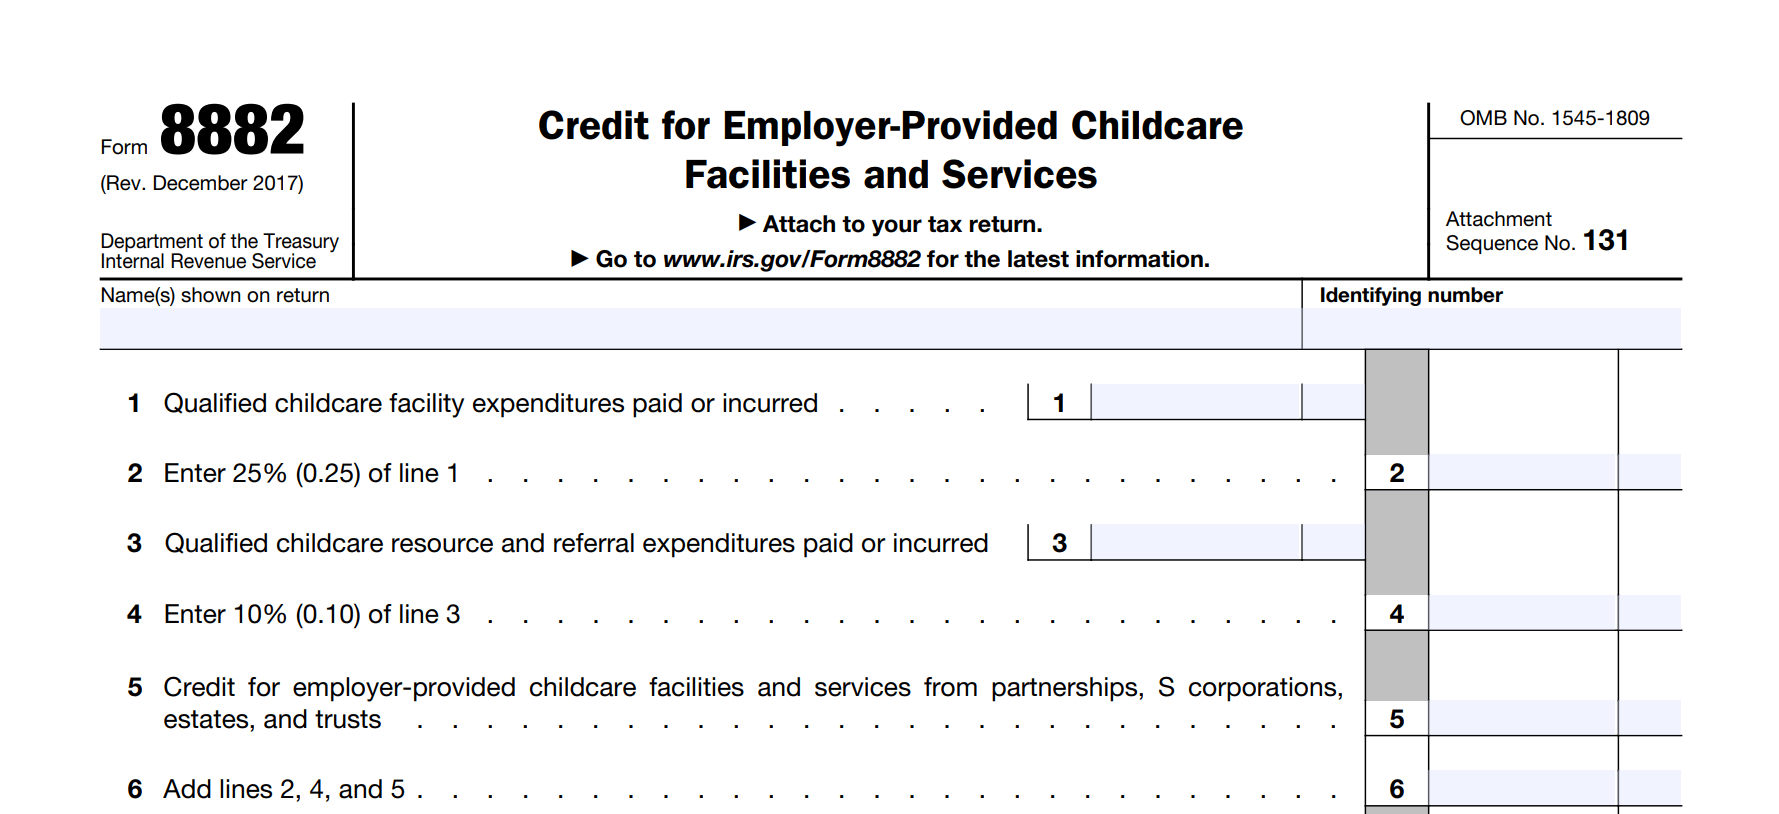 Form 8882: Credit for Employer-Provided Childcare Facilities and Services